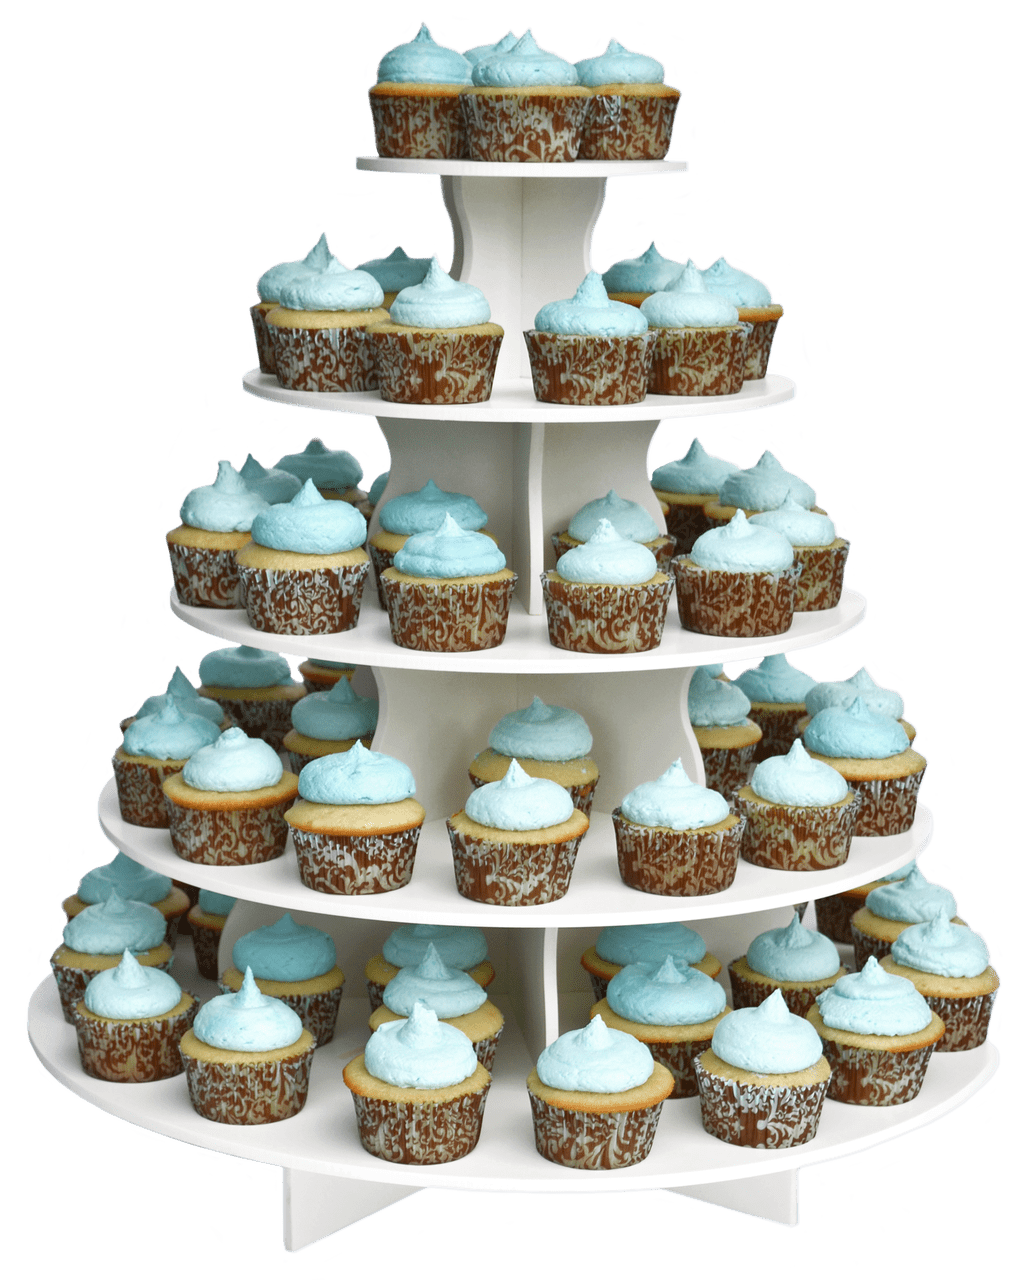 The Smart Baker New Quick and Easy 2 in 1 Round Cupcake Tower Stand - Reusable As 3 or 5 Tier Cupcake Stand - Holds 90+ Cupcakes